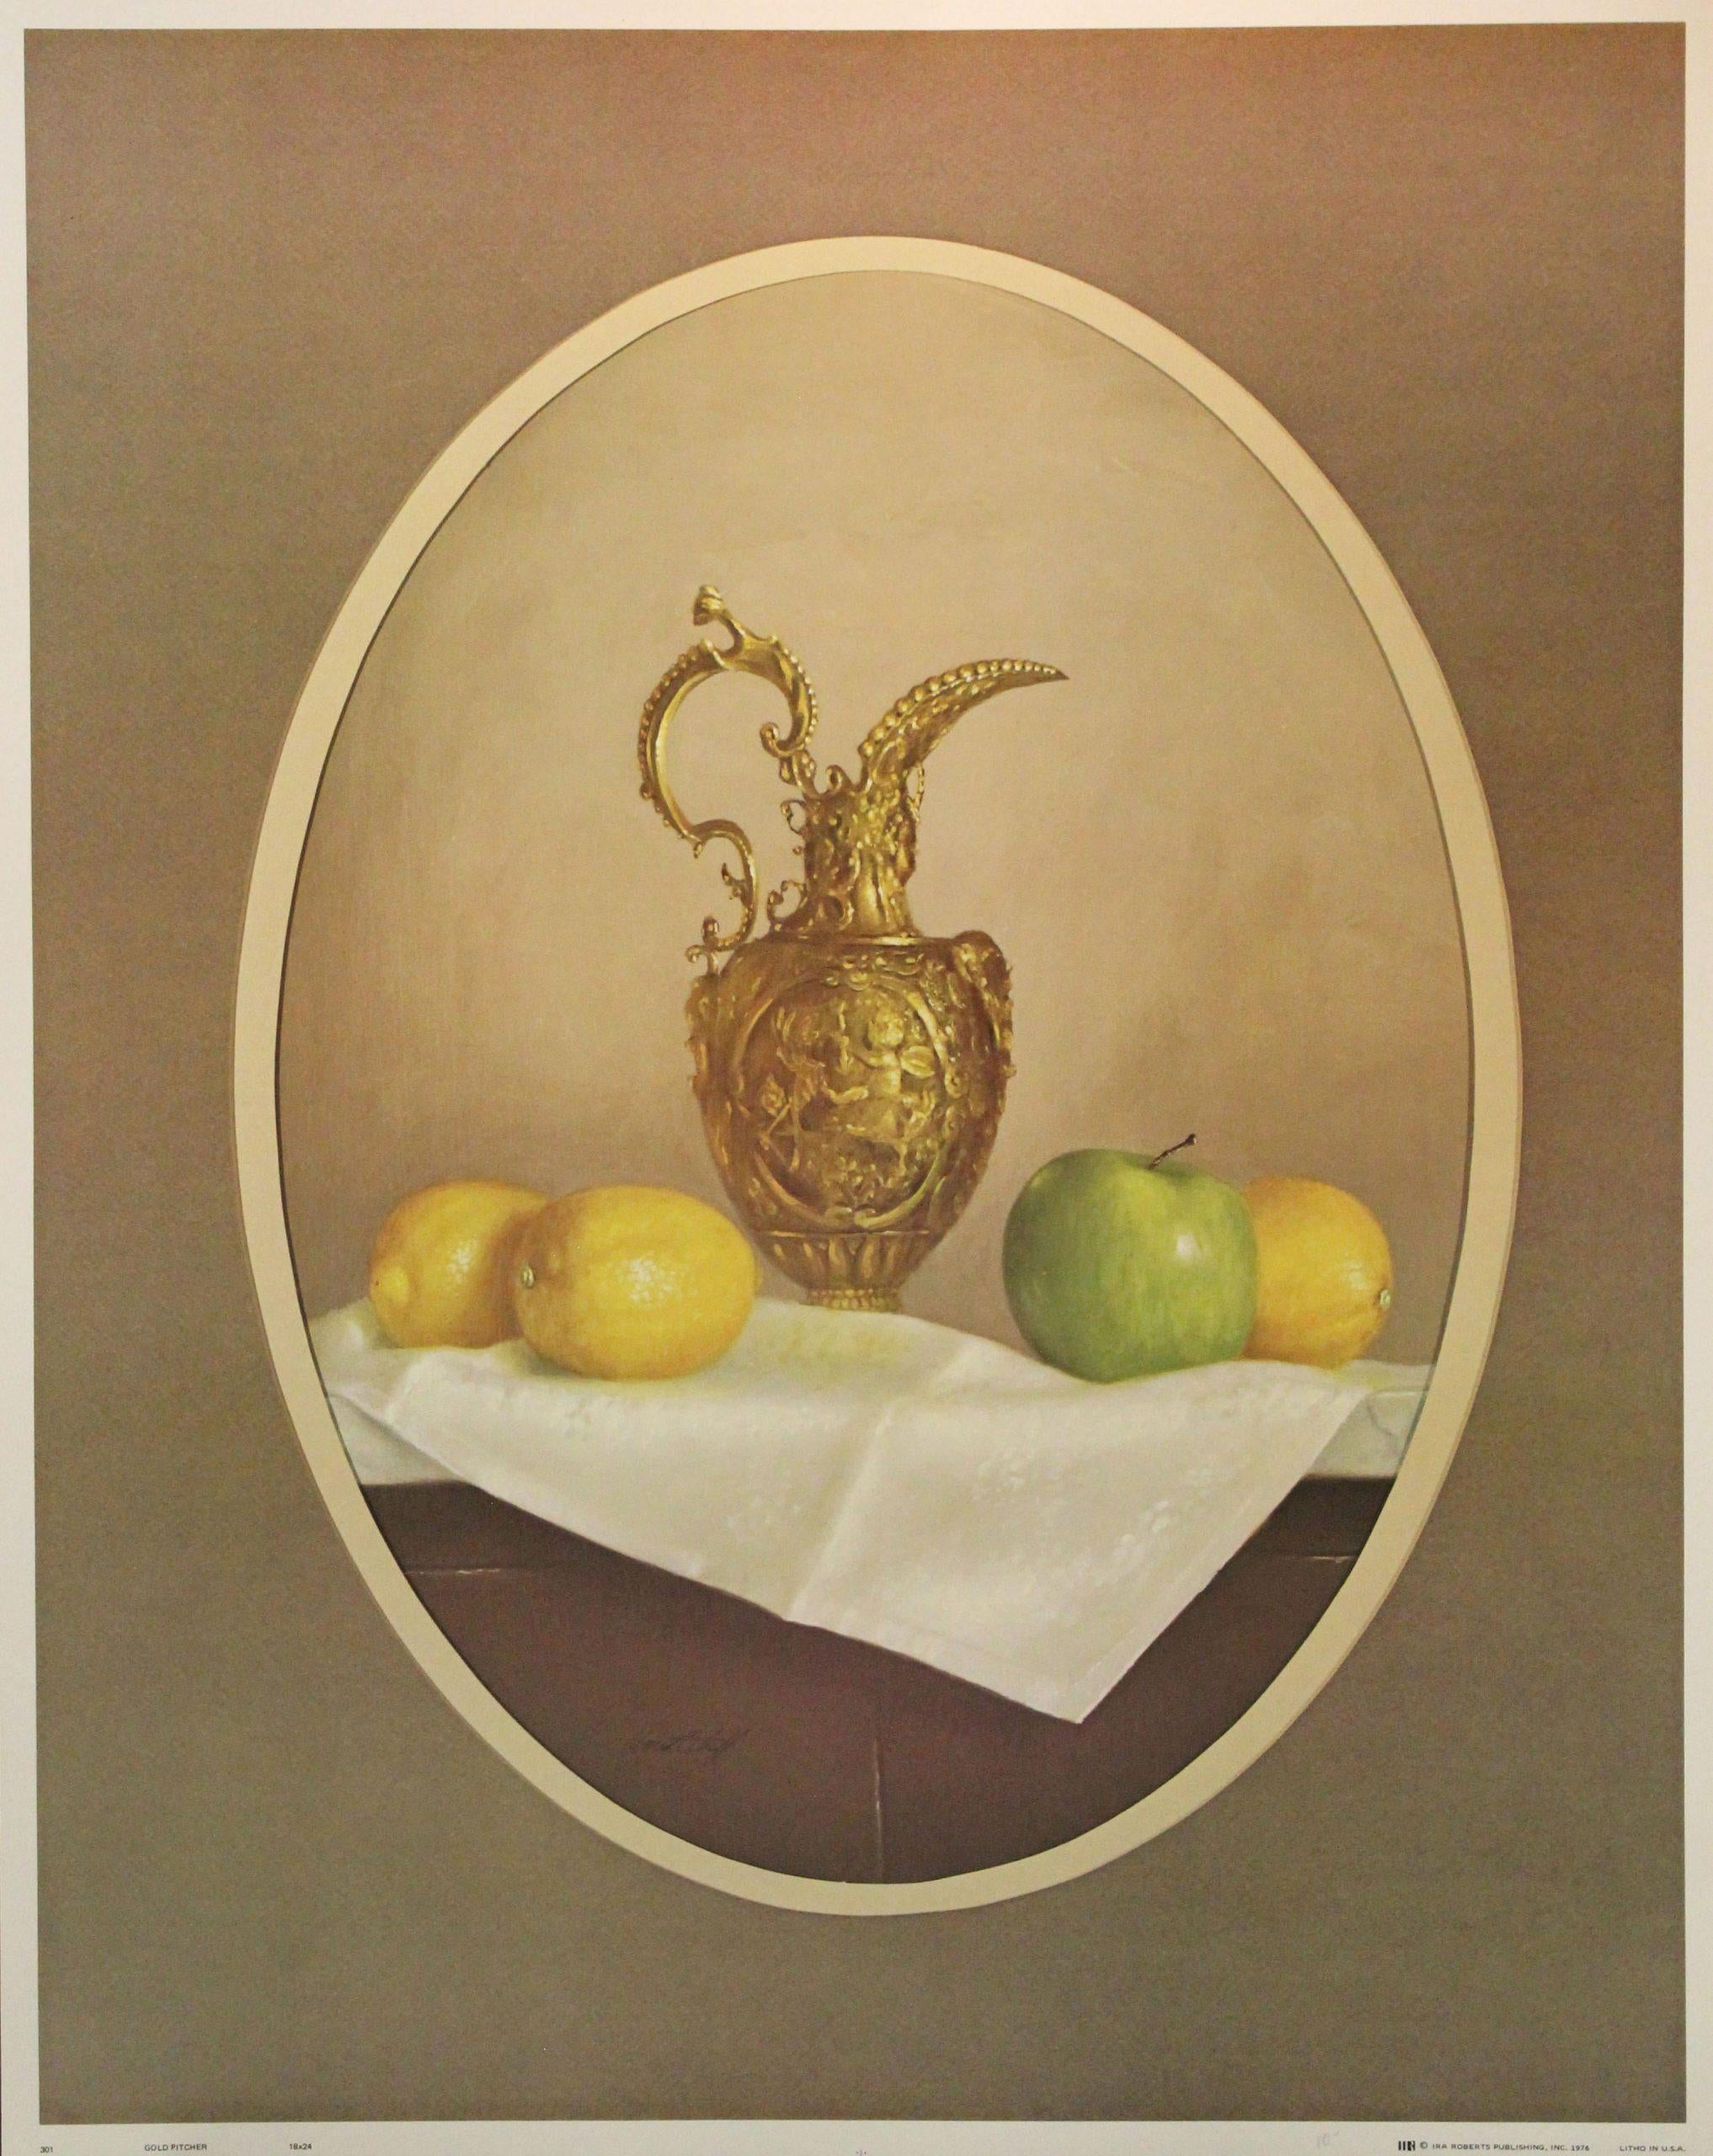 William Acheff Still-Life Print - Gold Pitcher-Print. IRA Roberts Publishing, Inc. 1976. Lithographed in USA